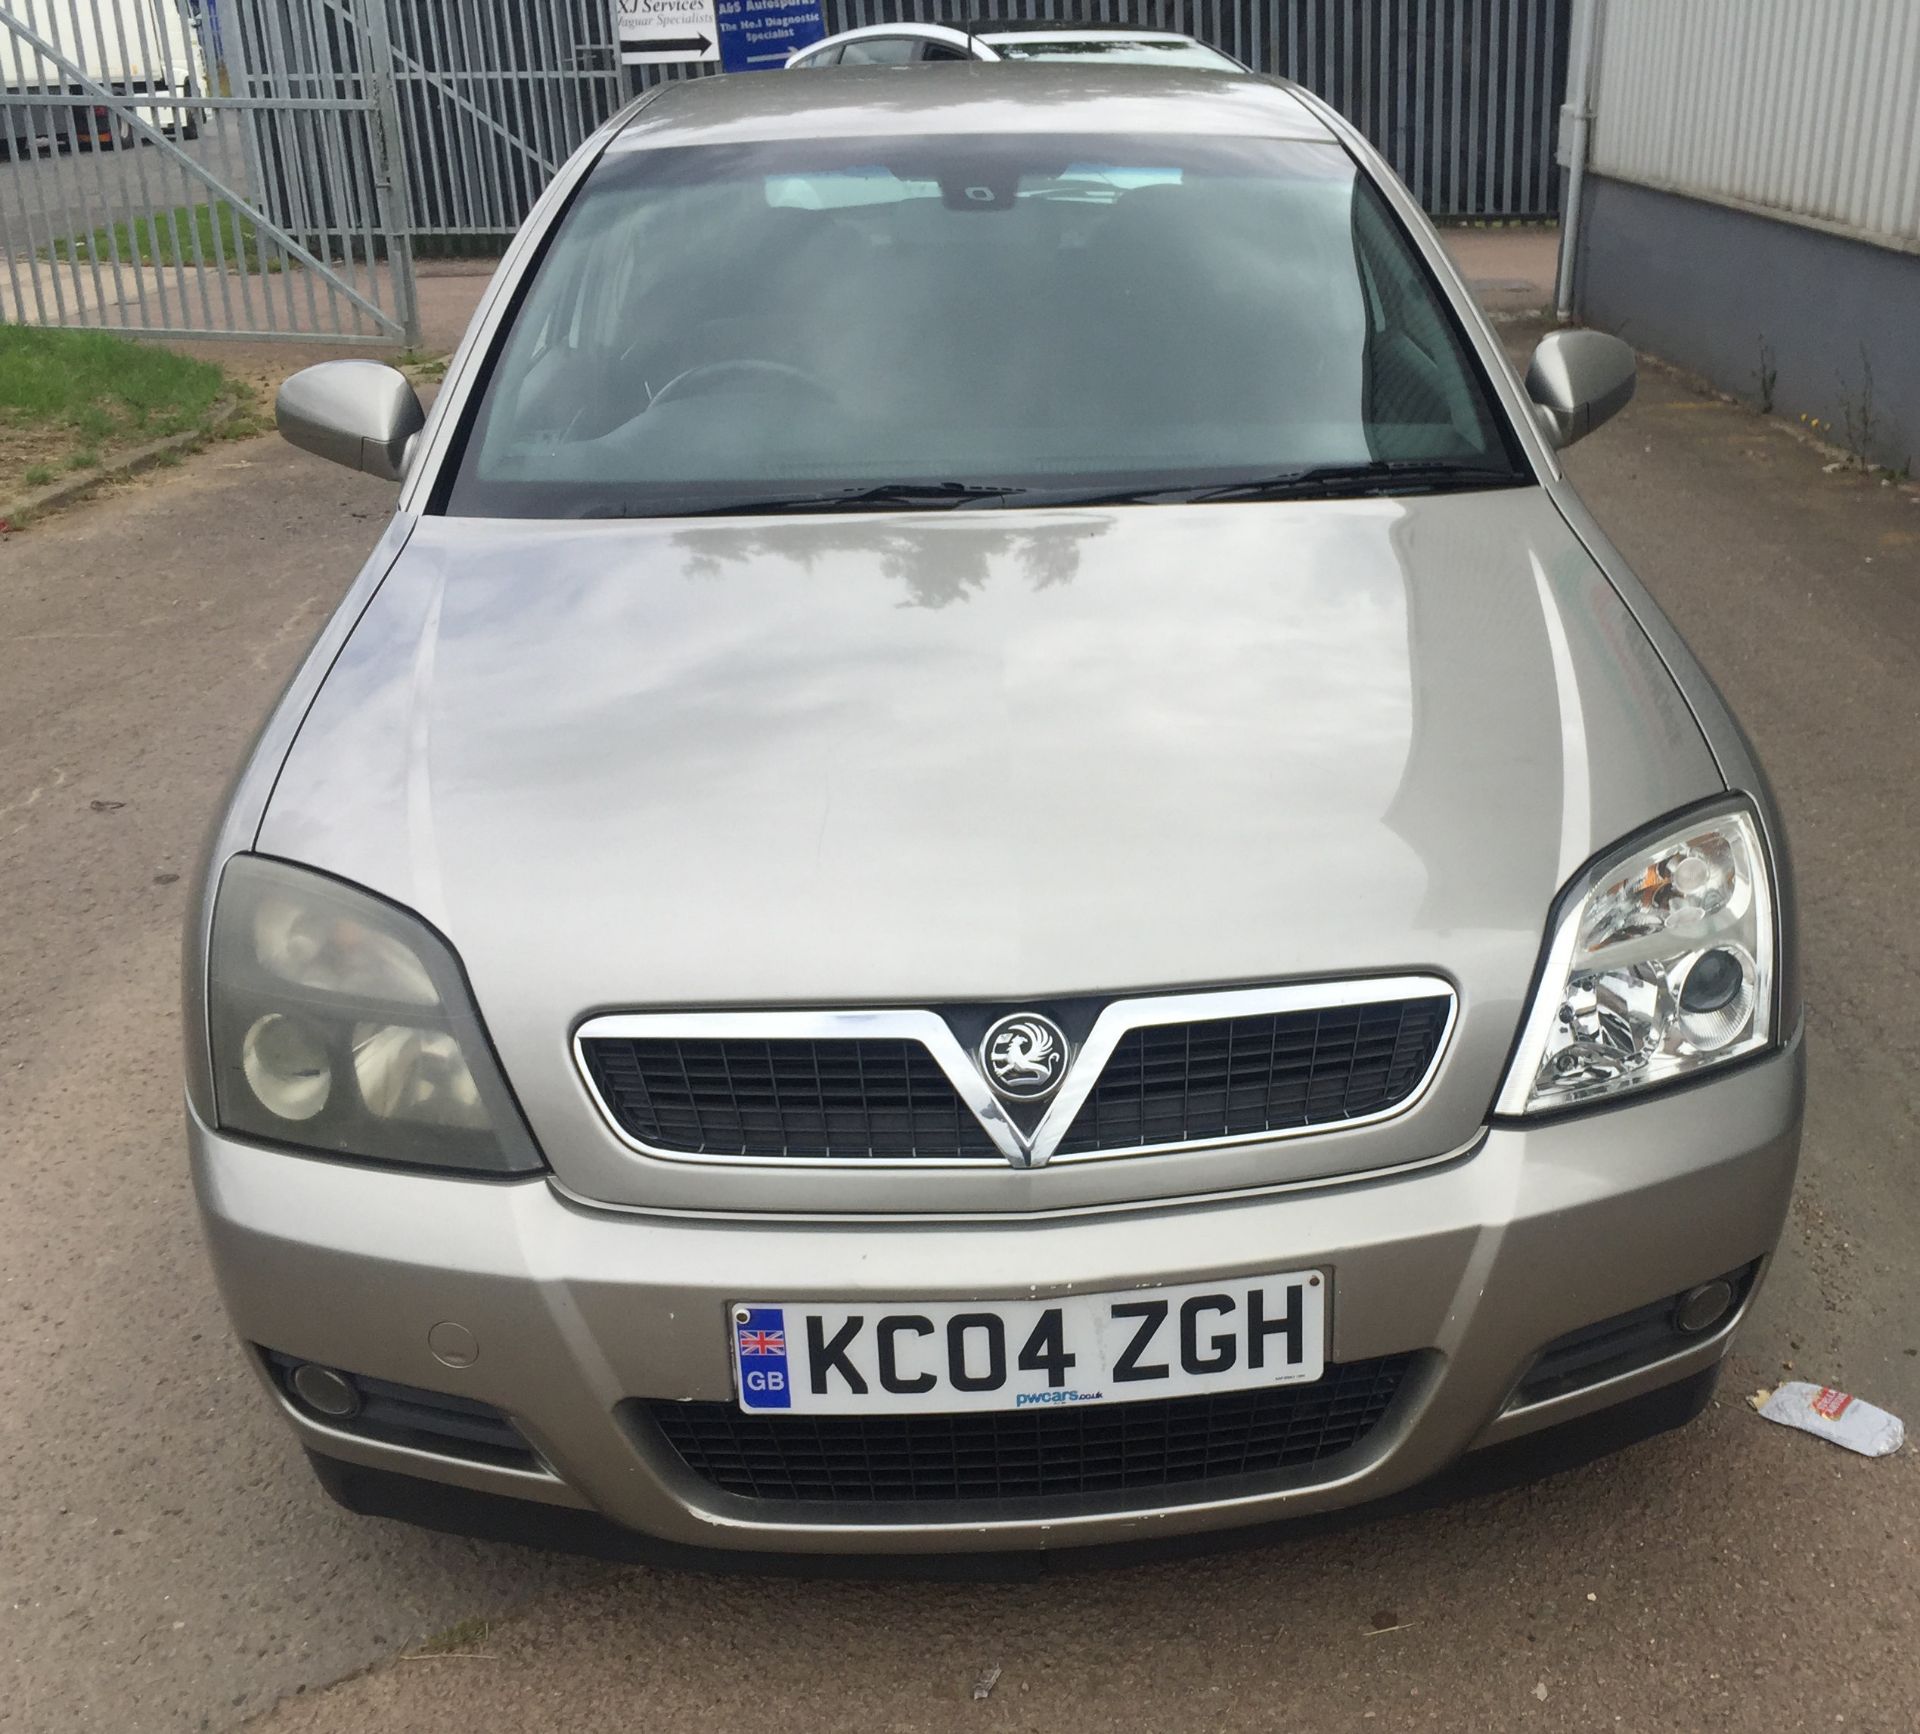 2004 Vauxhall Vectra 2.2 Sri Automatic 4 Dr Saloon - CL505 - NO VAT ON THE HAMMER - Location: Corby, - Image 2 of 7